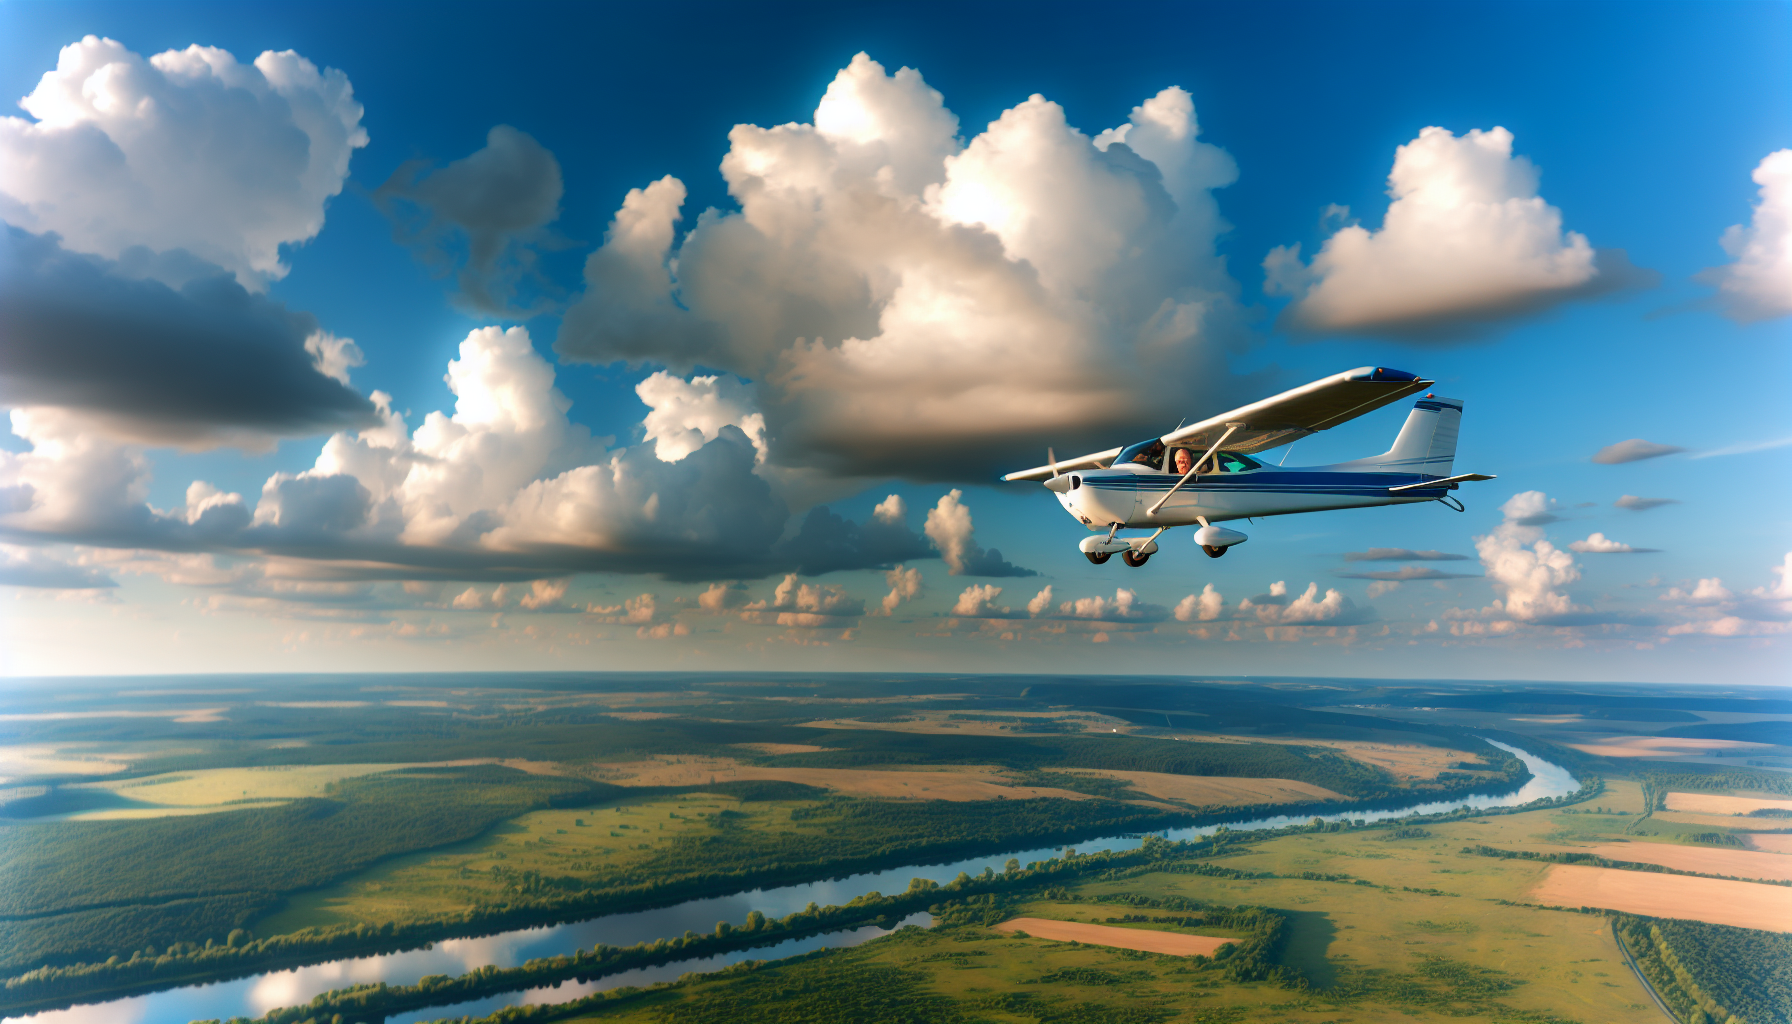 Aerial view of a small airplane flying over a scenic landscape